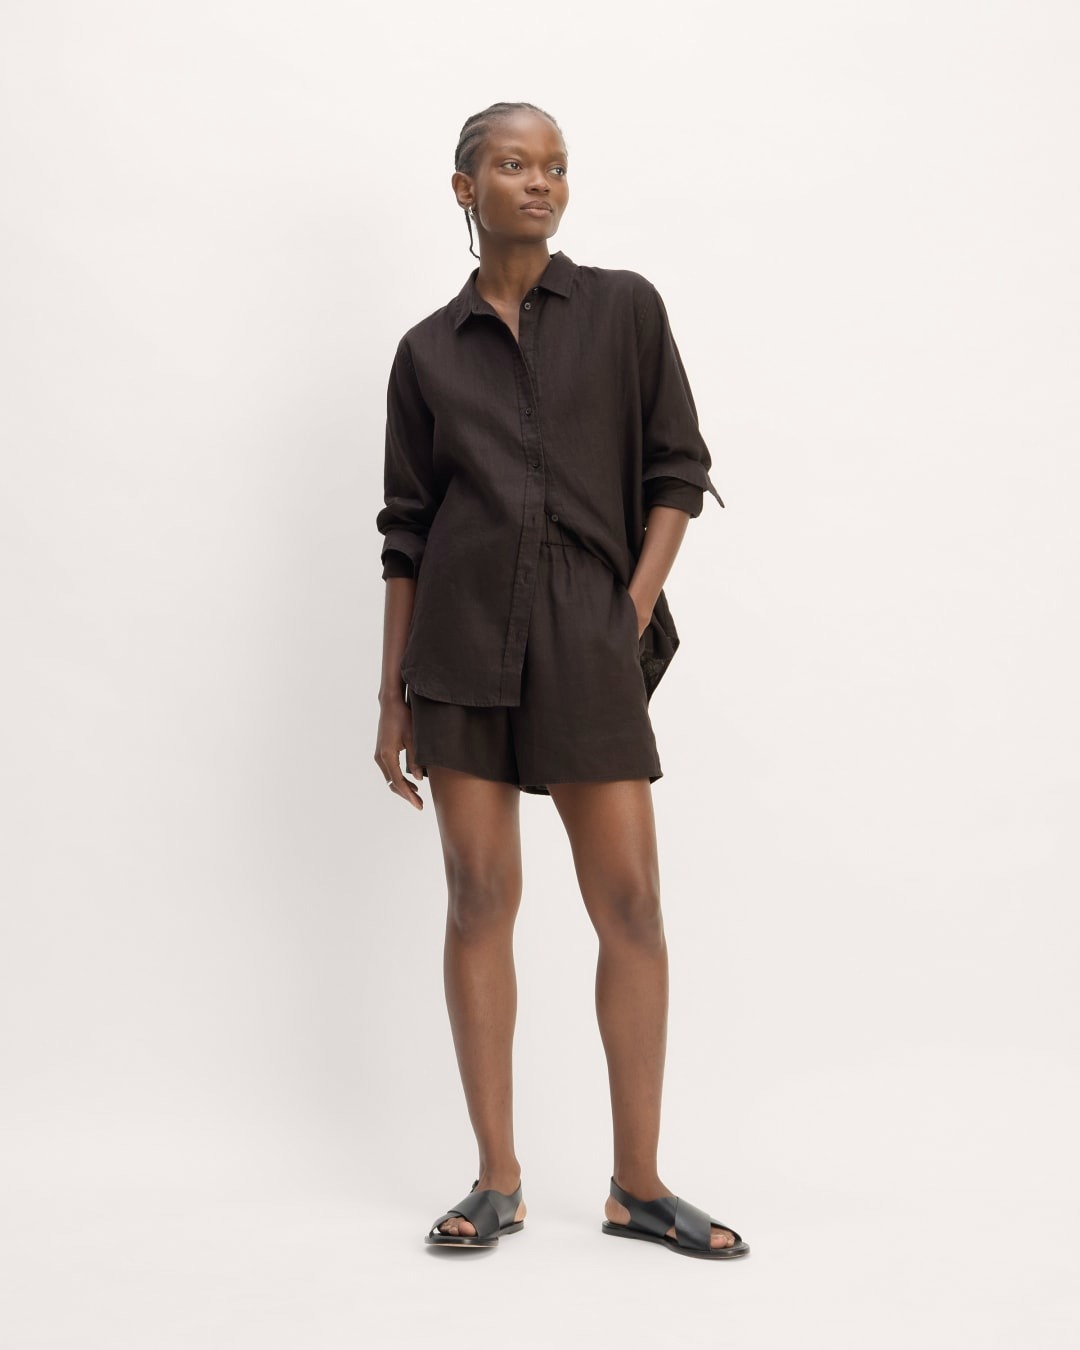 a model wears a black button-down shirt with matching short shorts